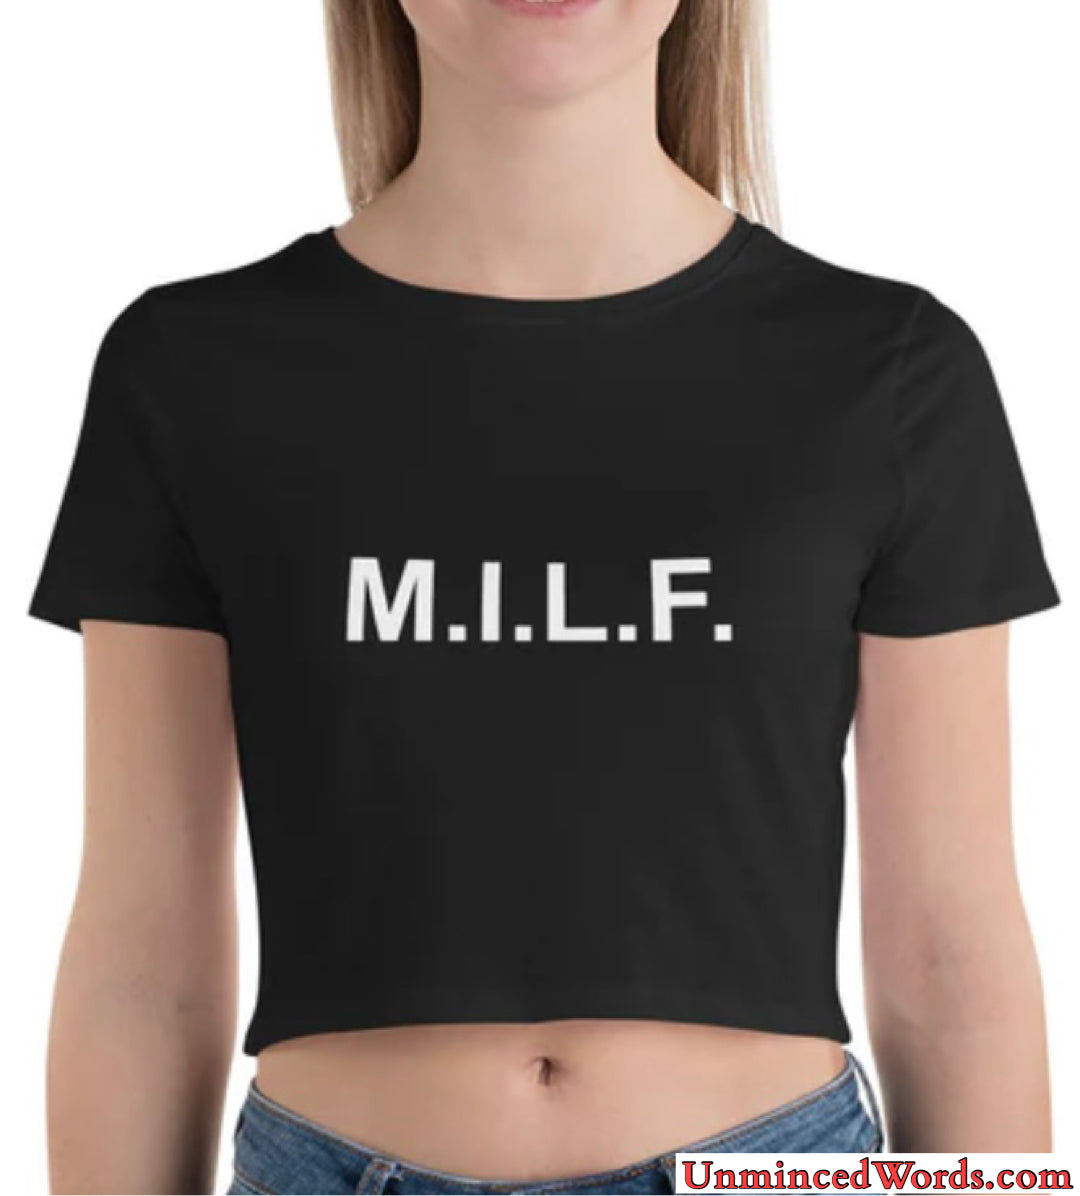 MILF designs are always the right choice